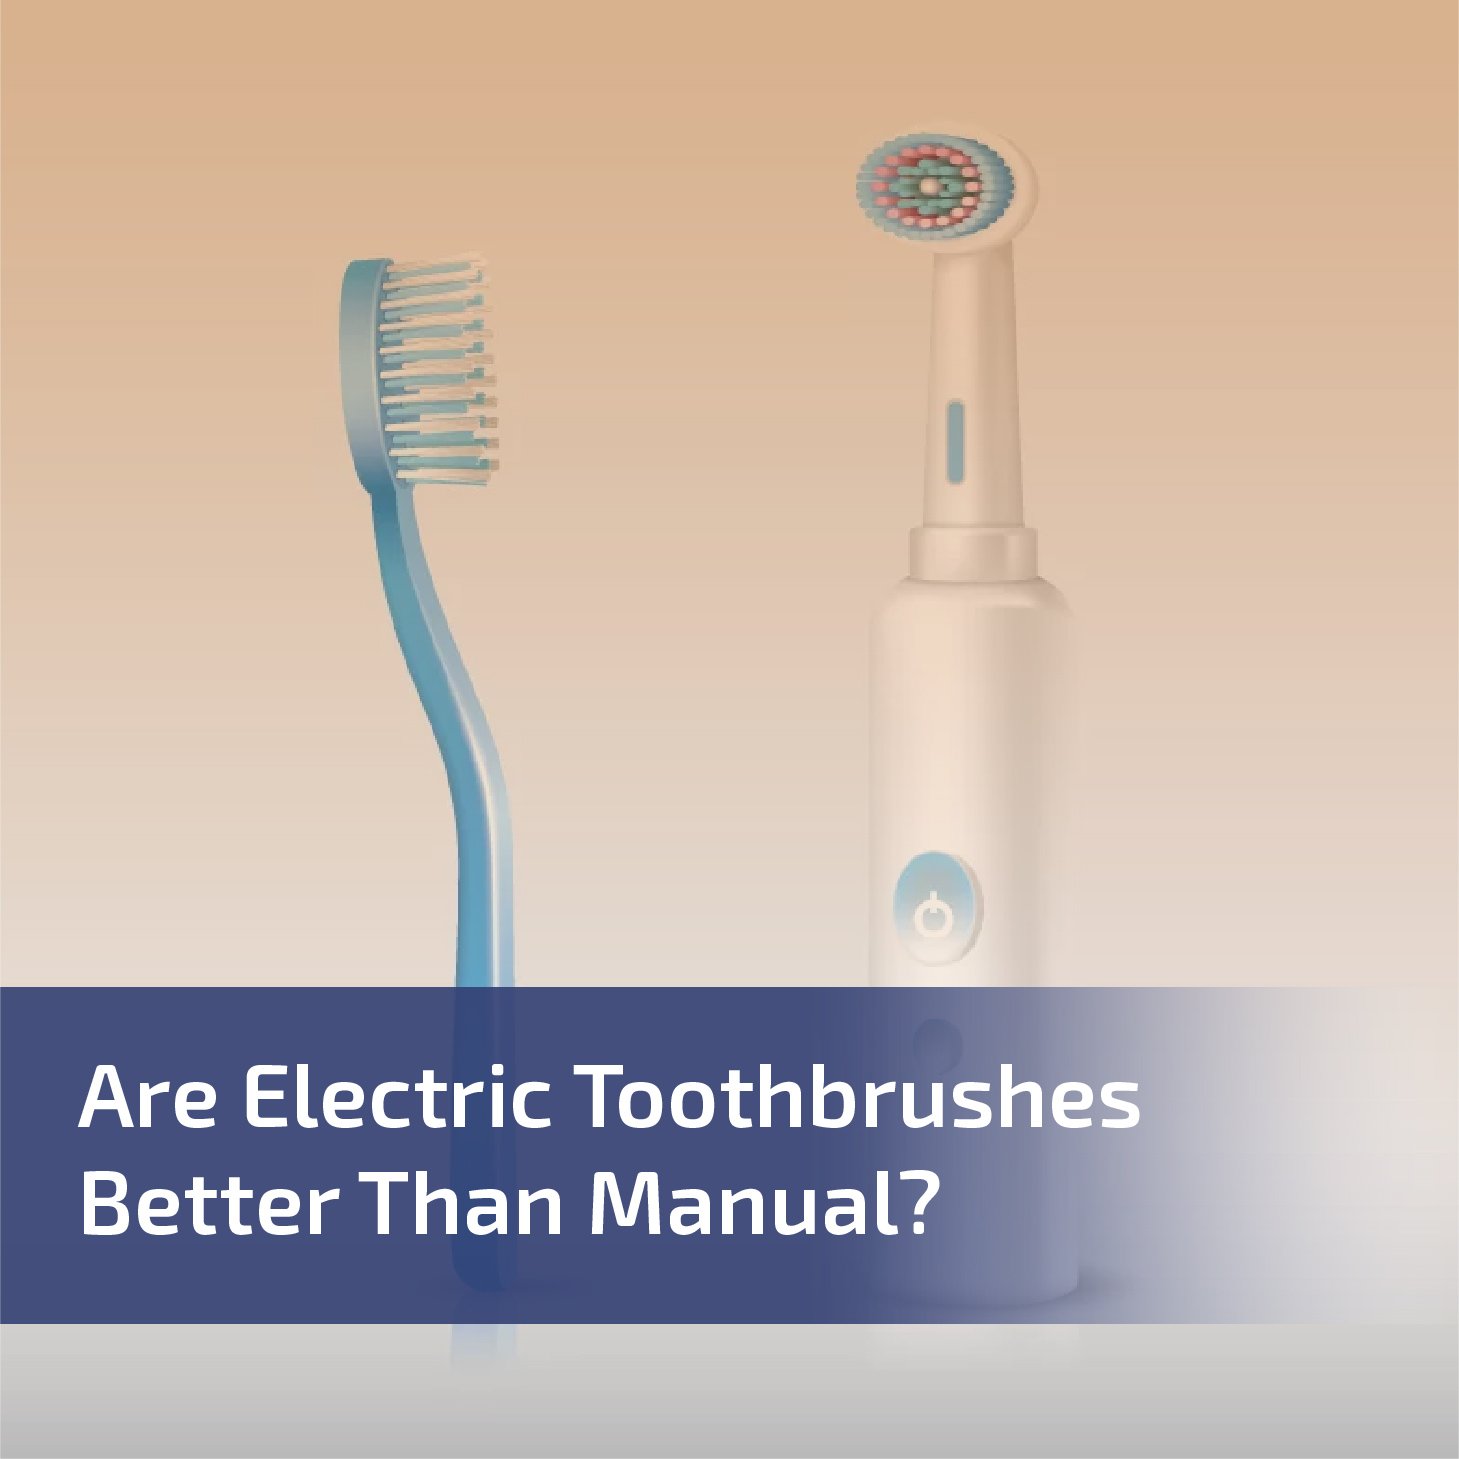 Are Electric Toothbrushes Better Than Manual?